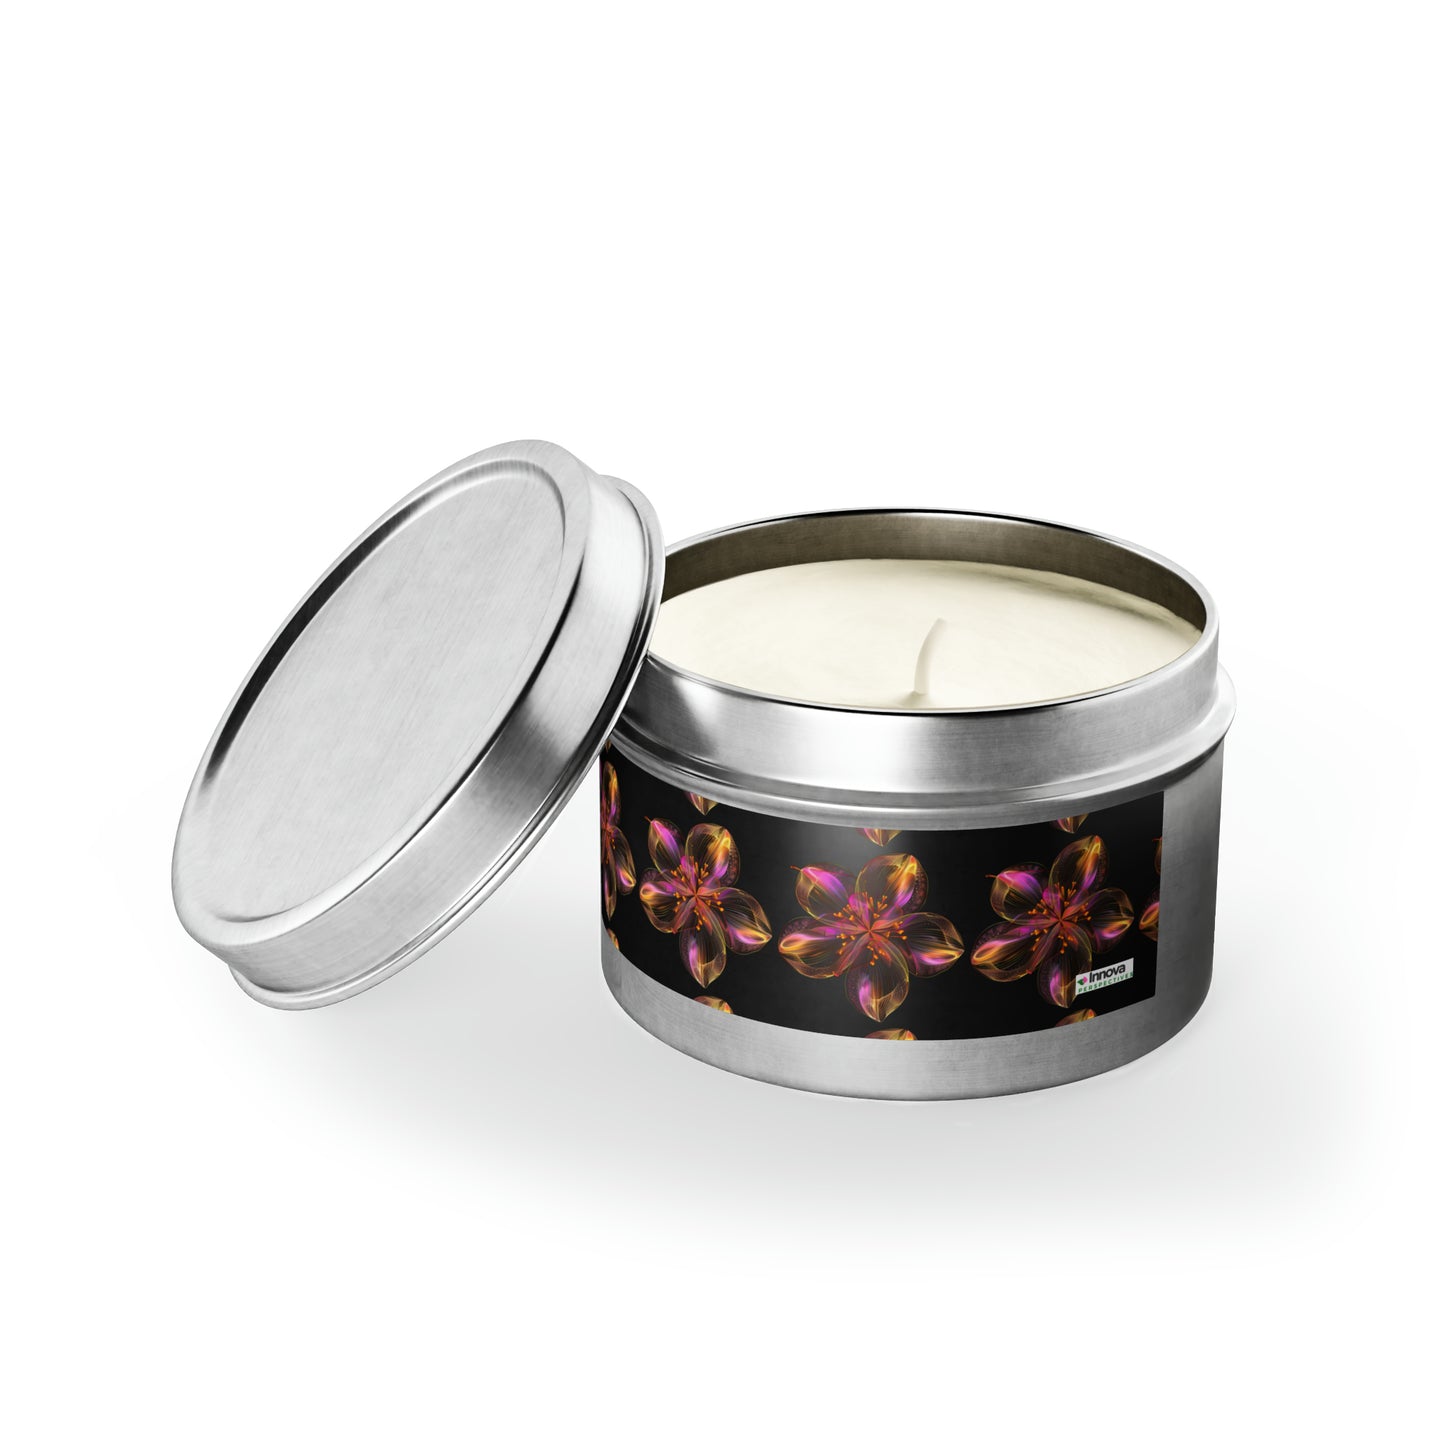 -Serenity Now: Aromatherapy Tin Candles for Yoga & Wellness- lead and zinc-free